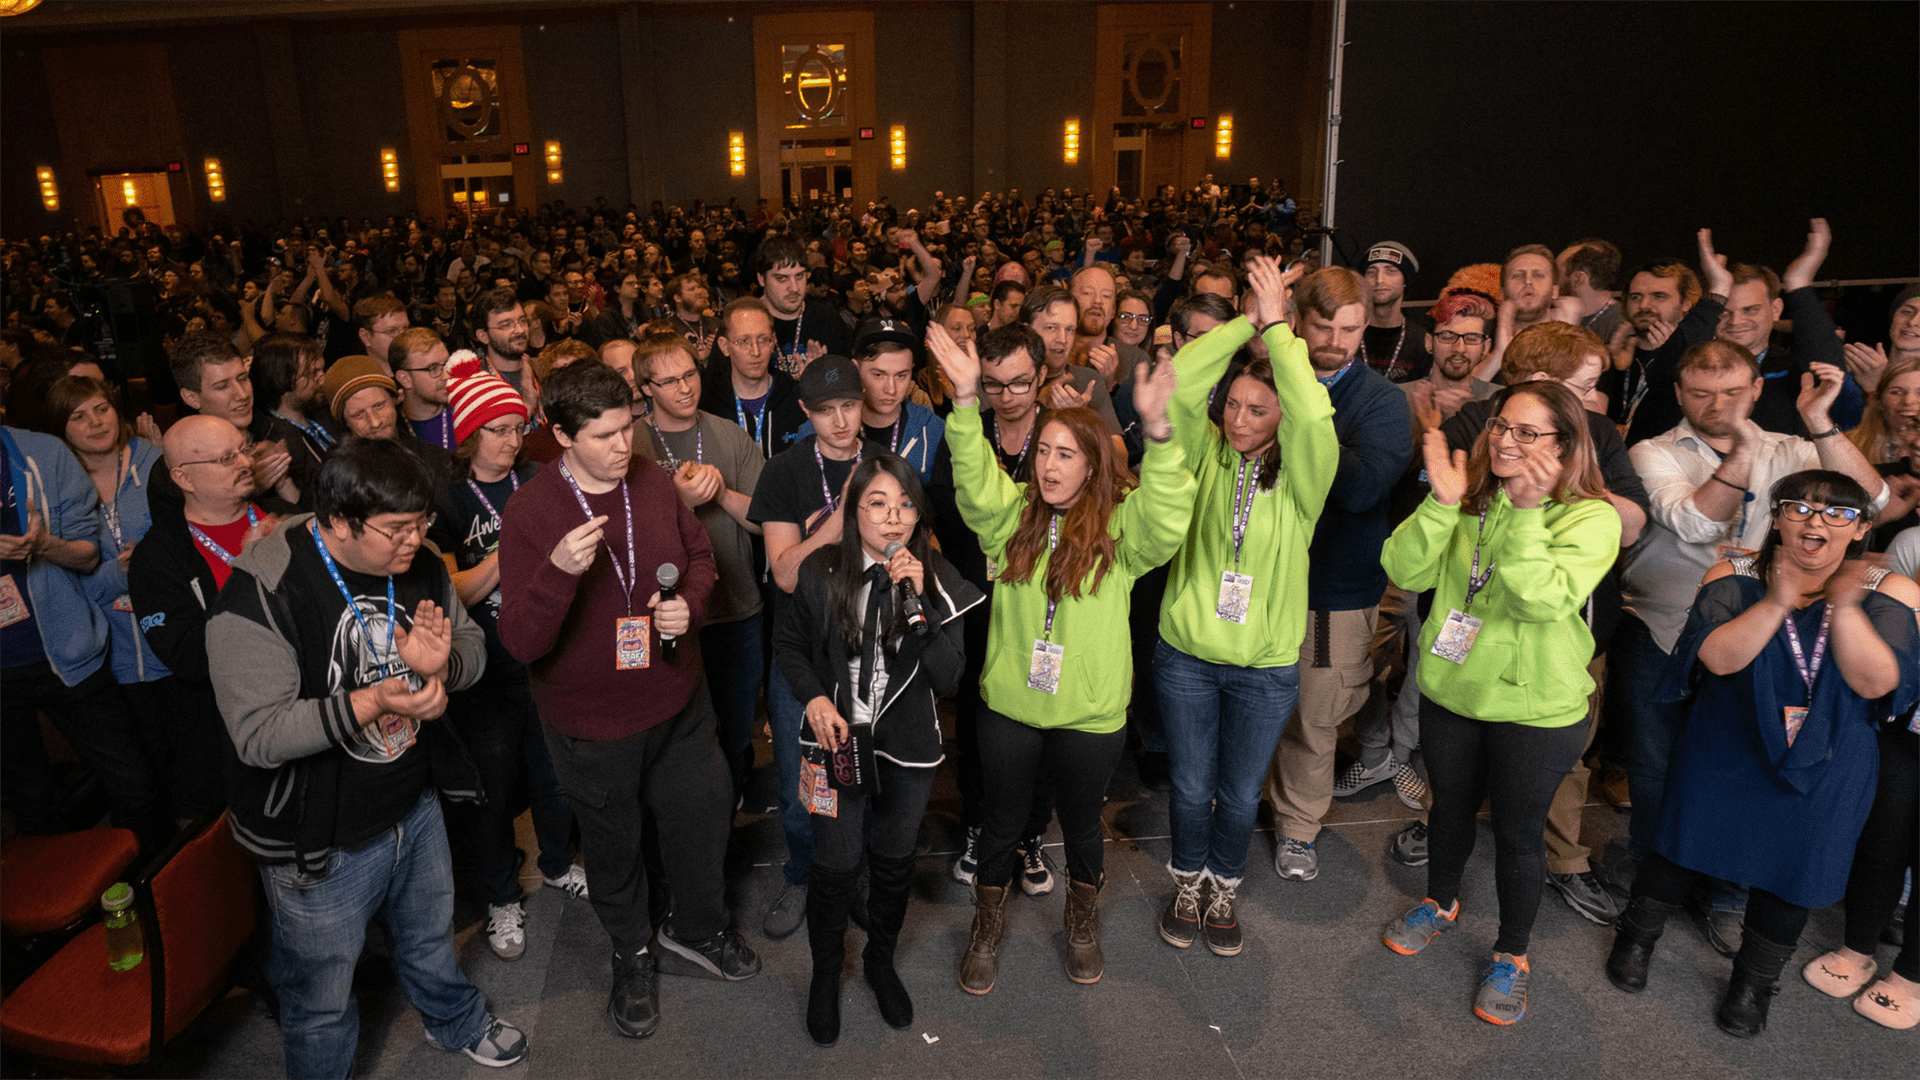 A crowd of people in a hotel ballroom celebrating Games Done Quick 2019